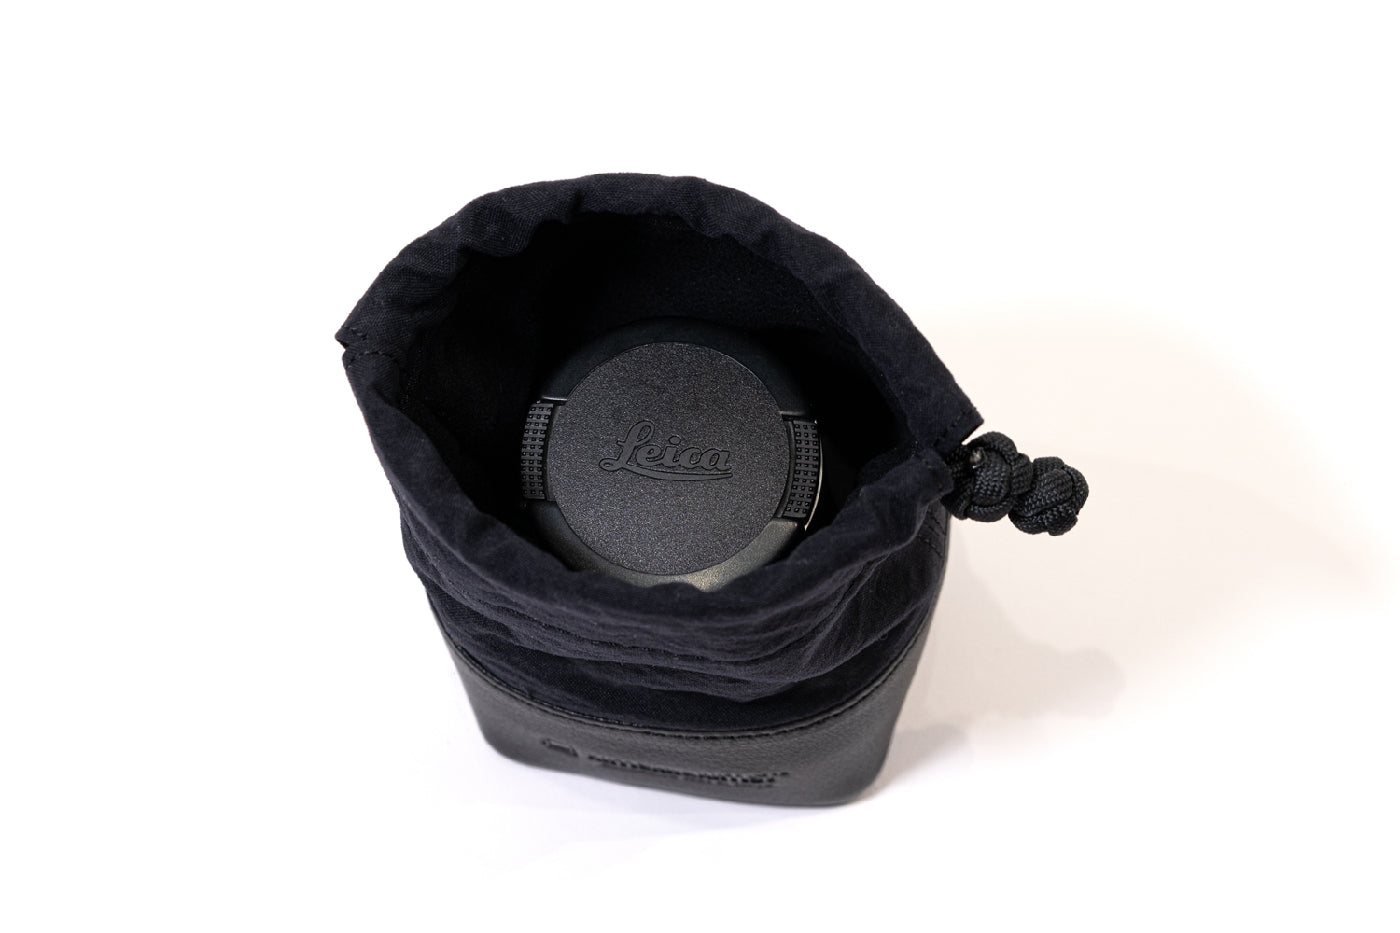 ACAM-LP120 Fabric and Leather Lens Pouch (S)